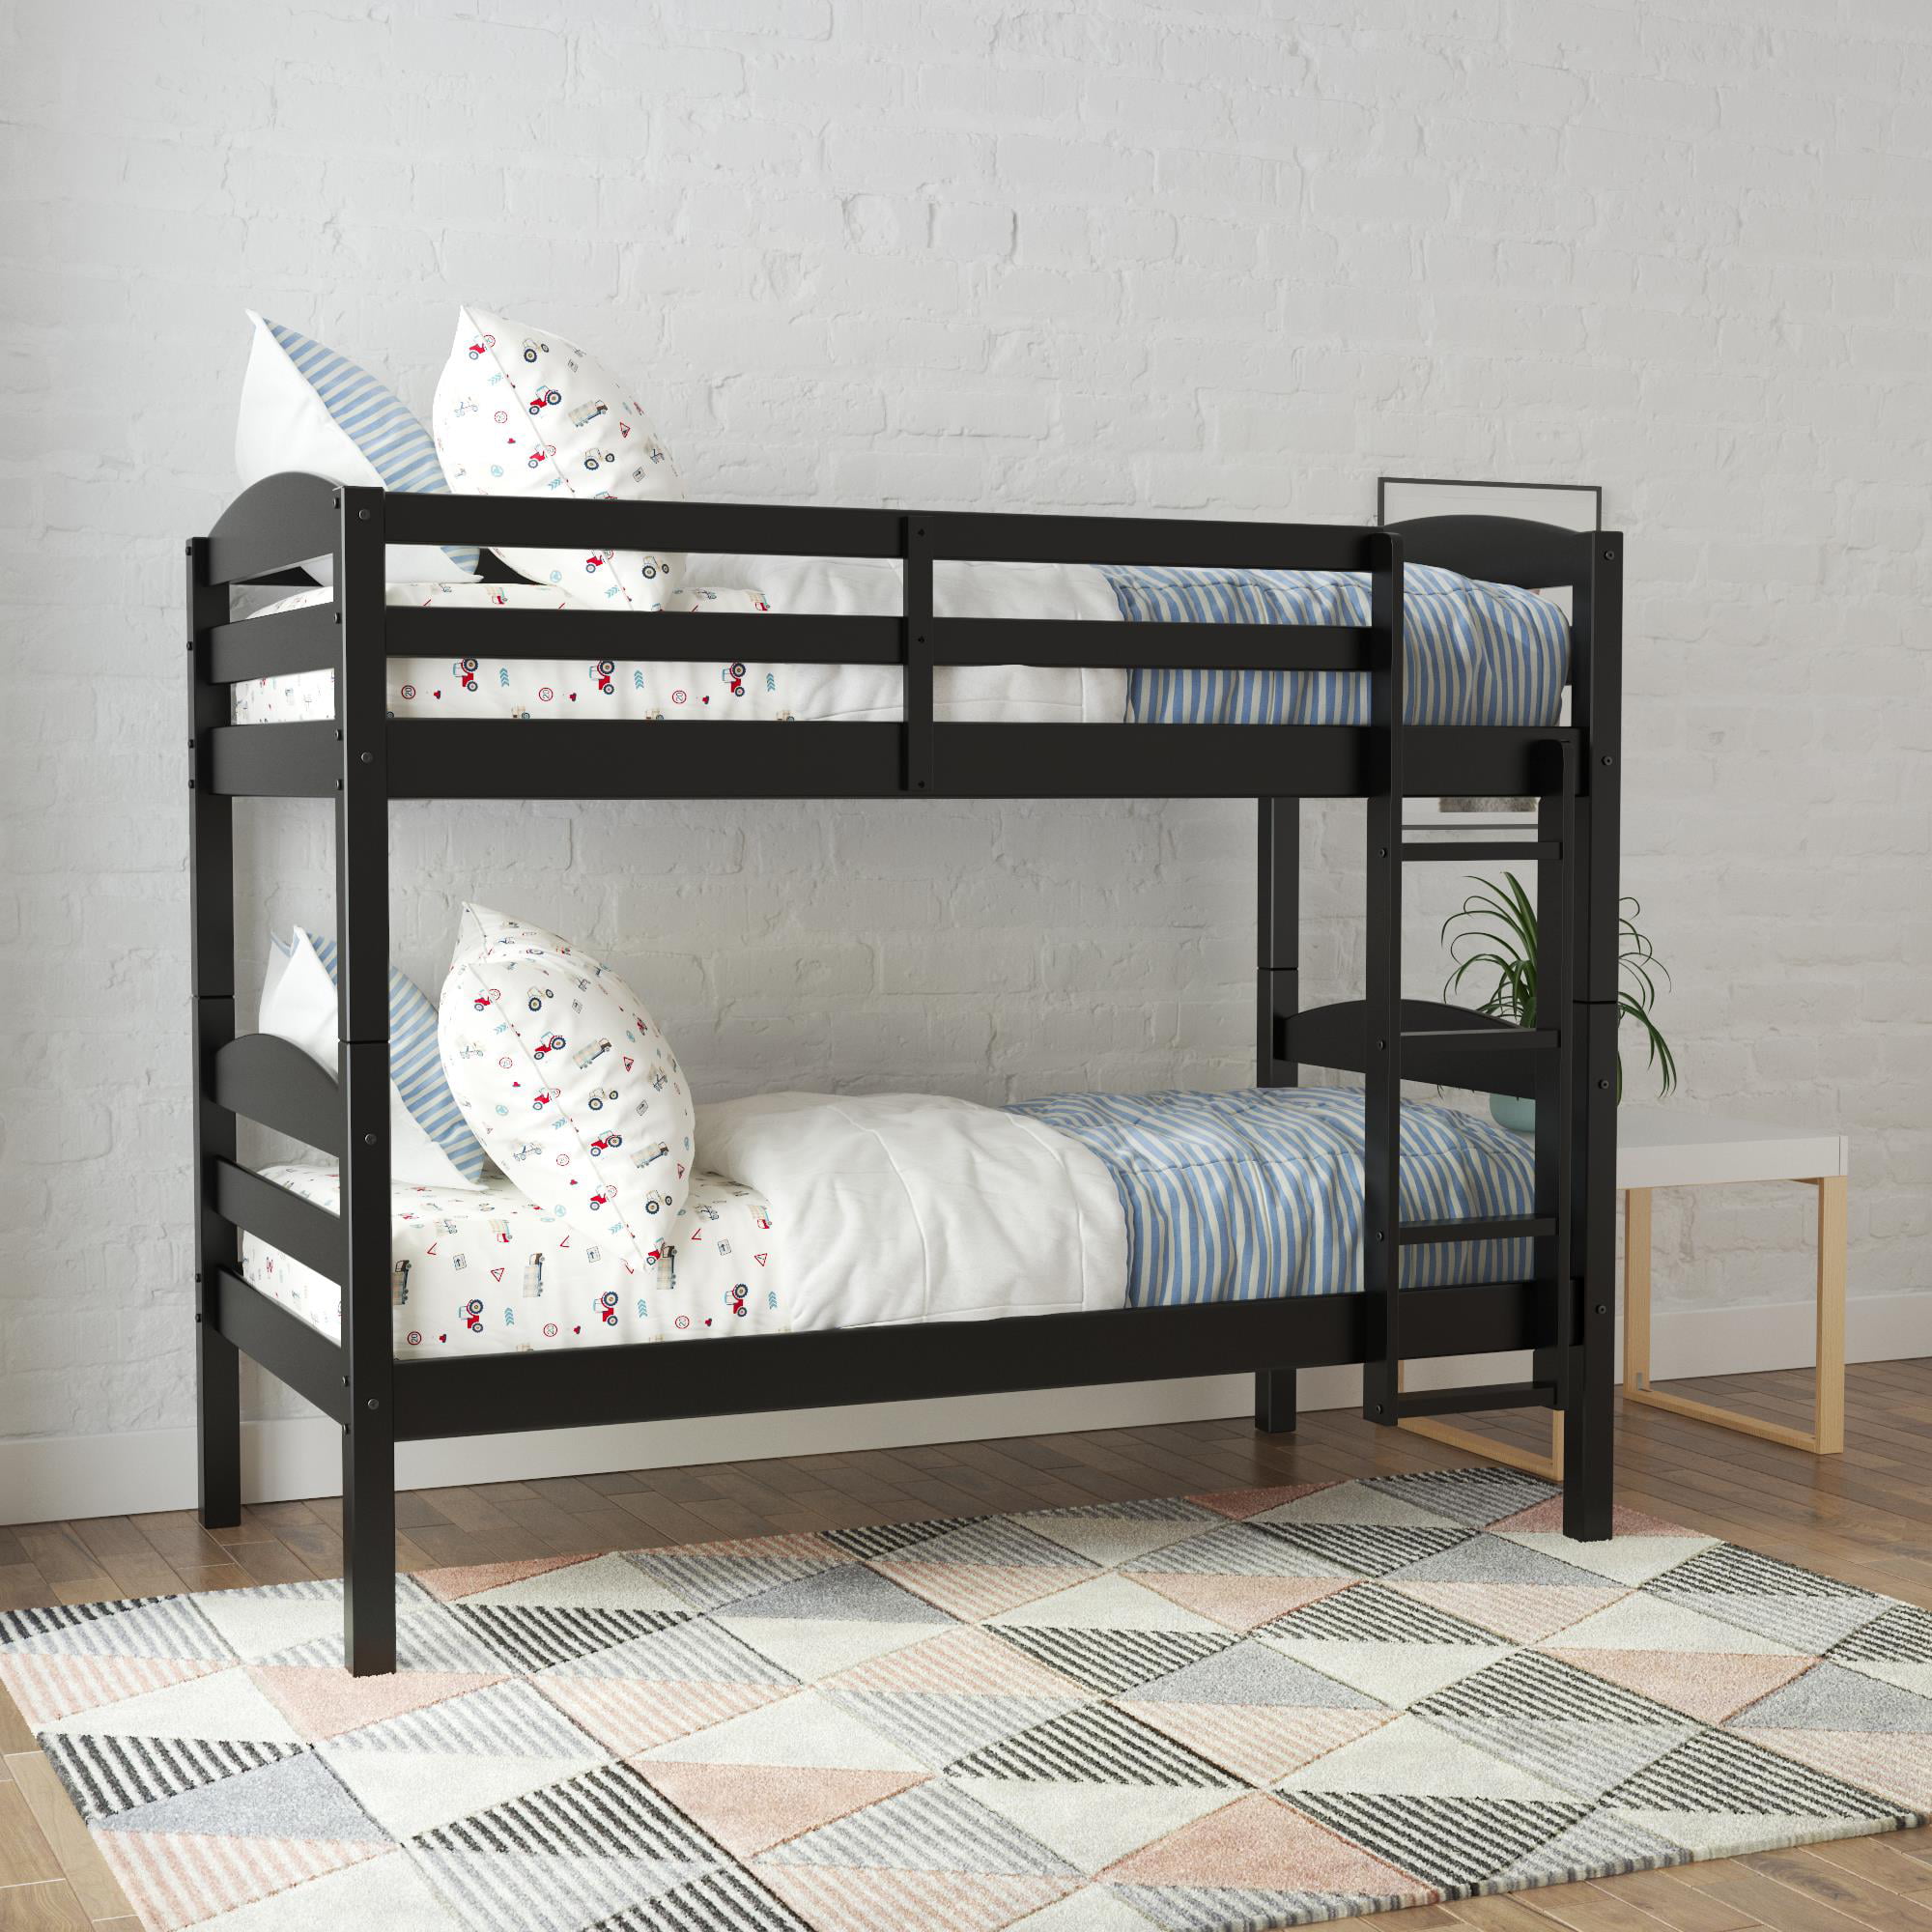 Better Homes Gardens Leighton Wood, White Wood Twin Bunk Bed